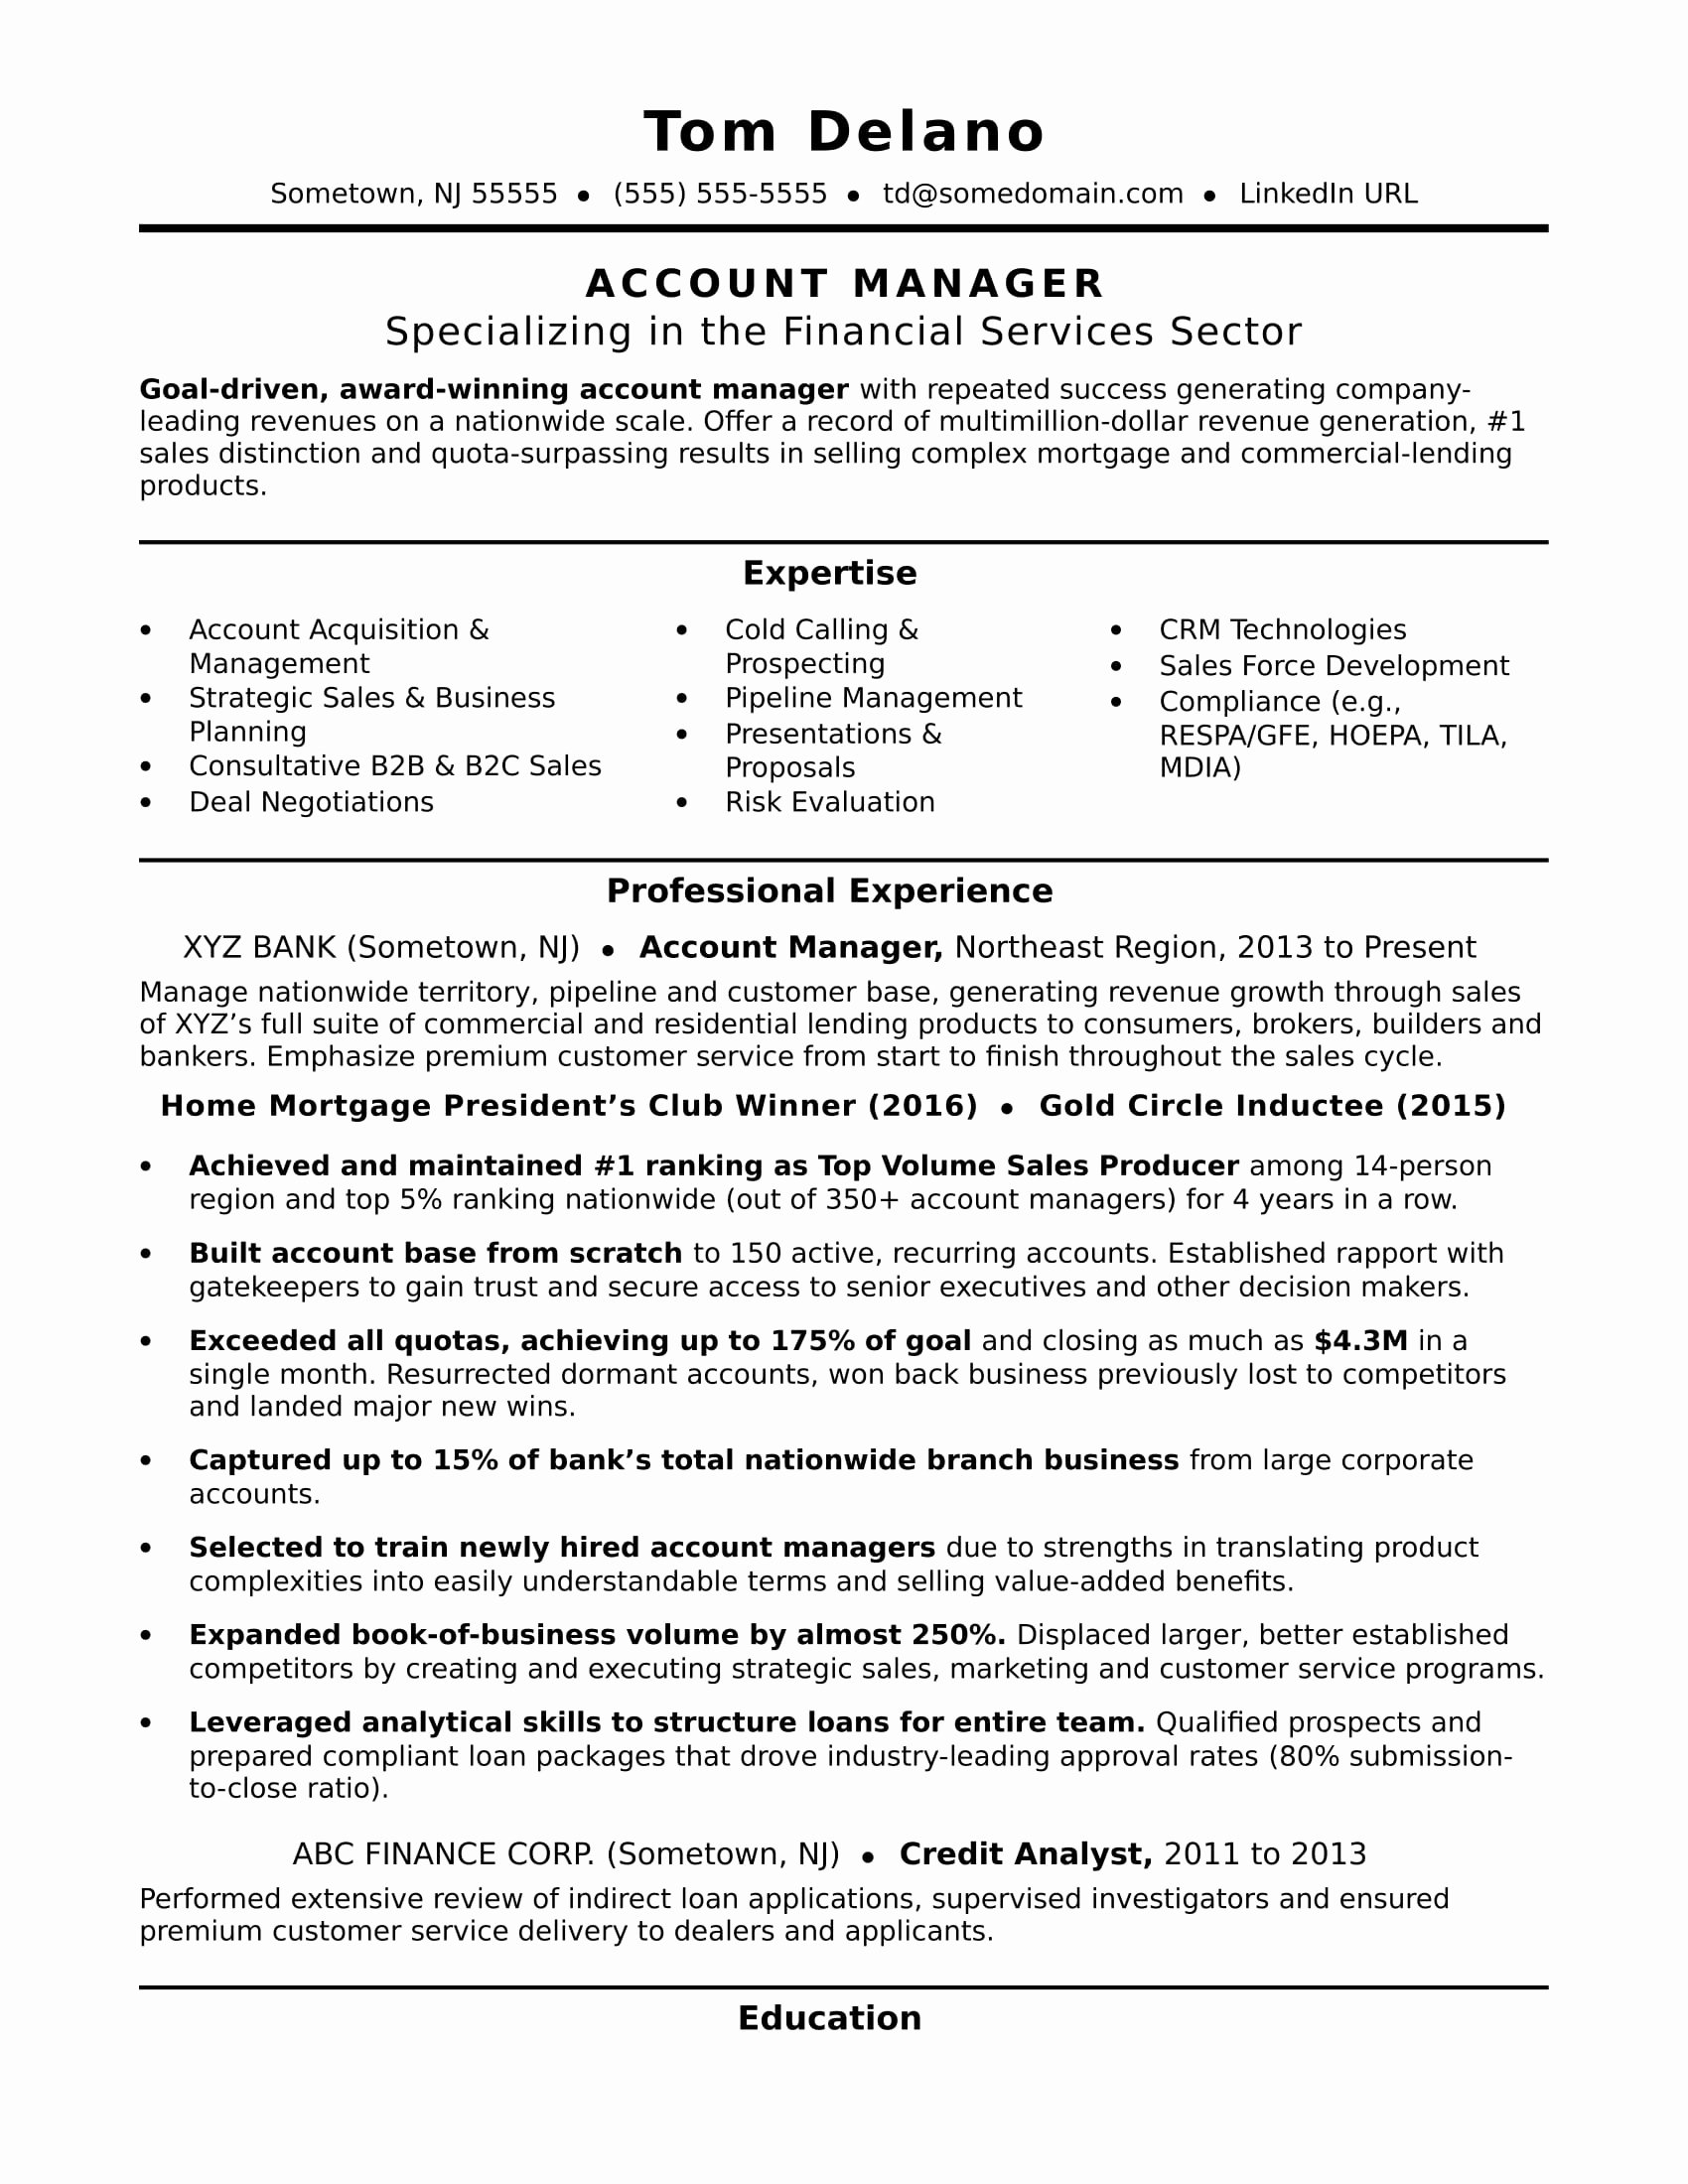 Sample Resume for Account Executive Position